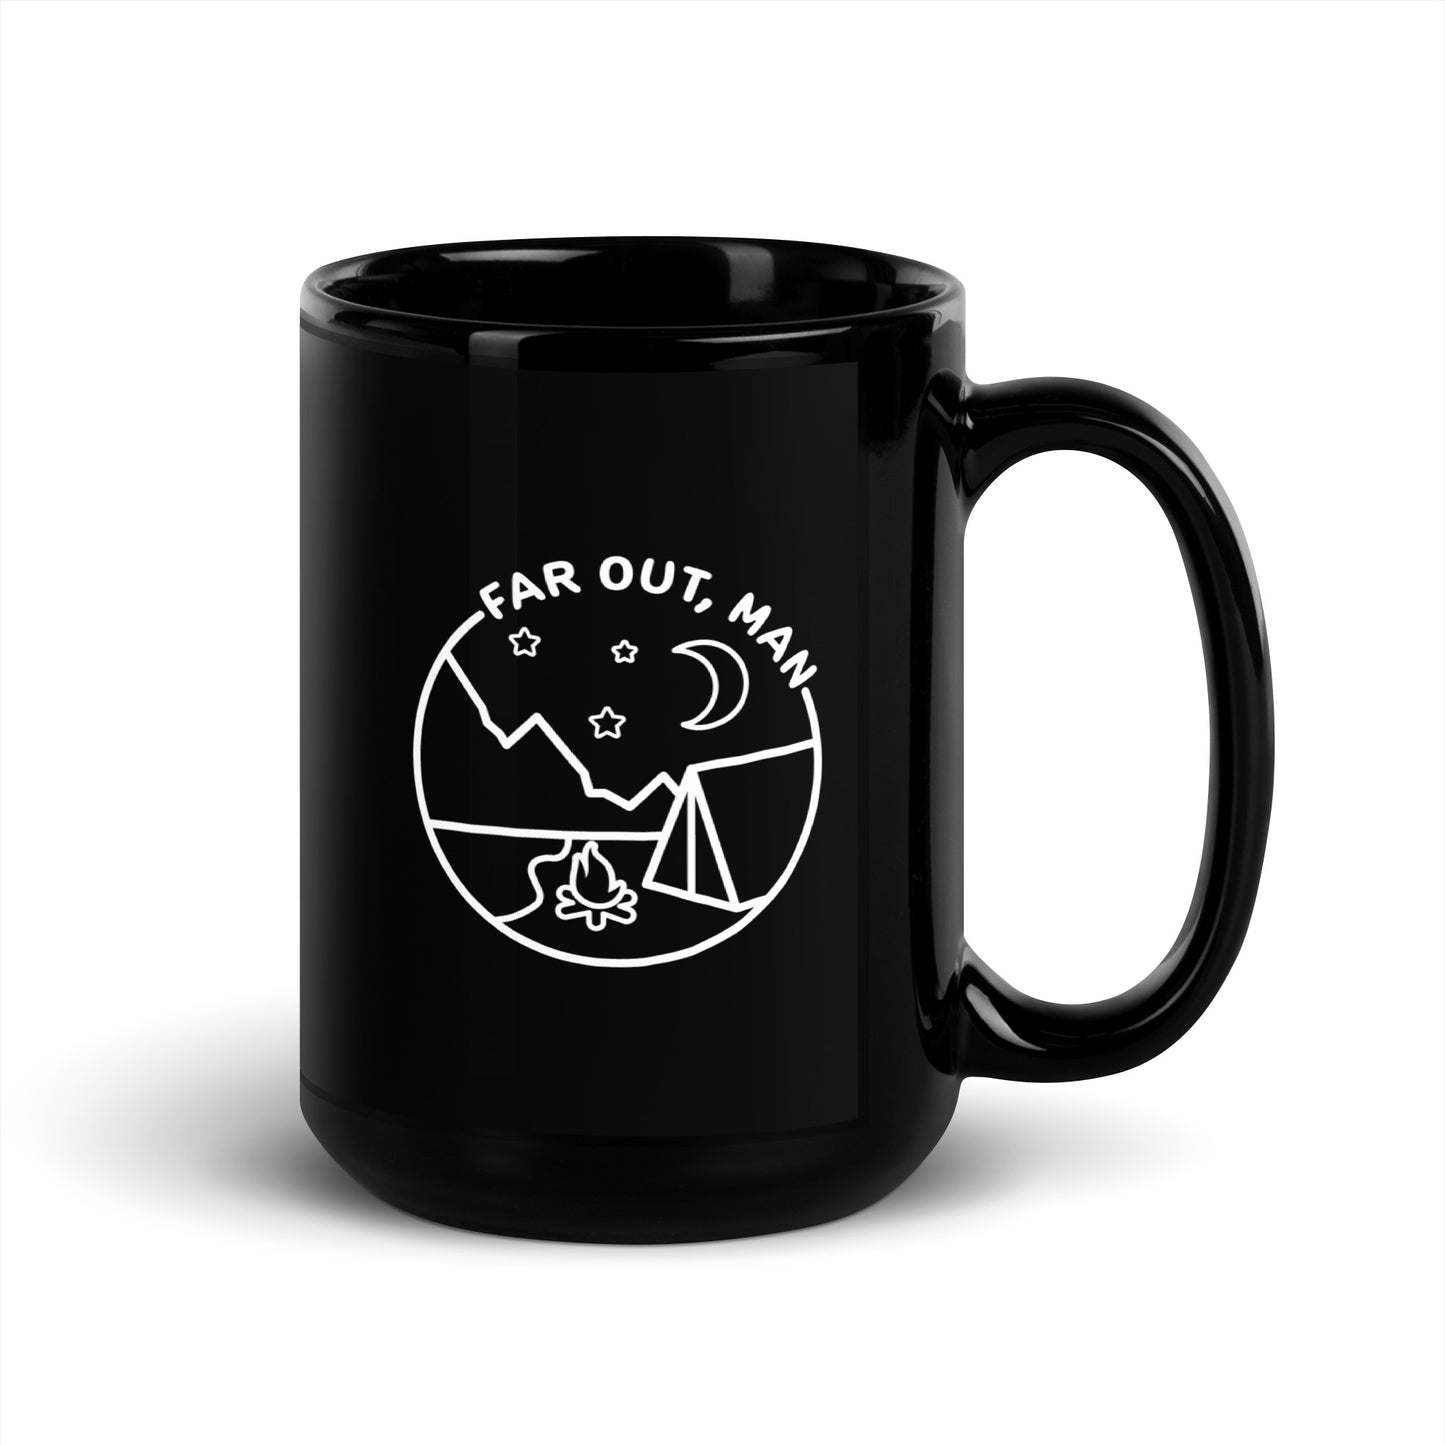 A black ceramic 15 ounce coffee mug with a white lineart illustration of a campfire and tent under a night sky. Text in an arc above the graphic reads "Far out, man"